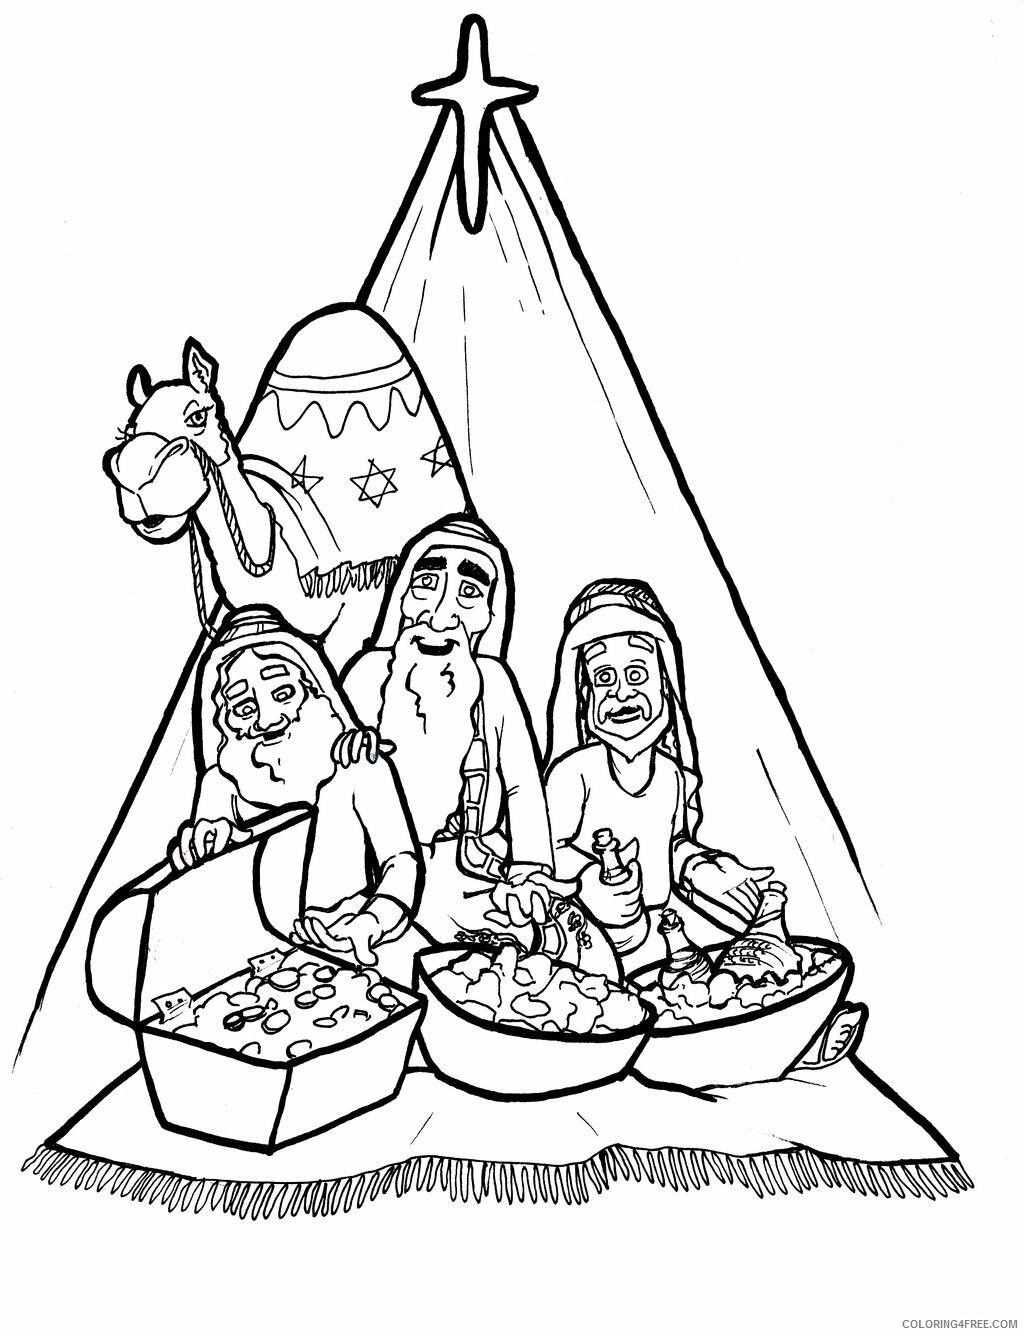 3 Kings Coloring Pages Printable Sheets The 3 Kings Page 2021 09 522 Coloring4free